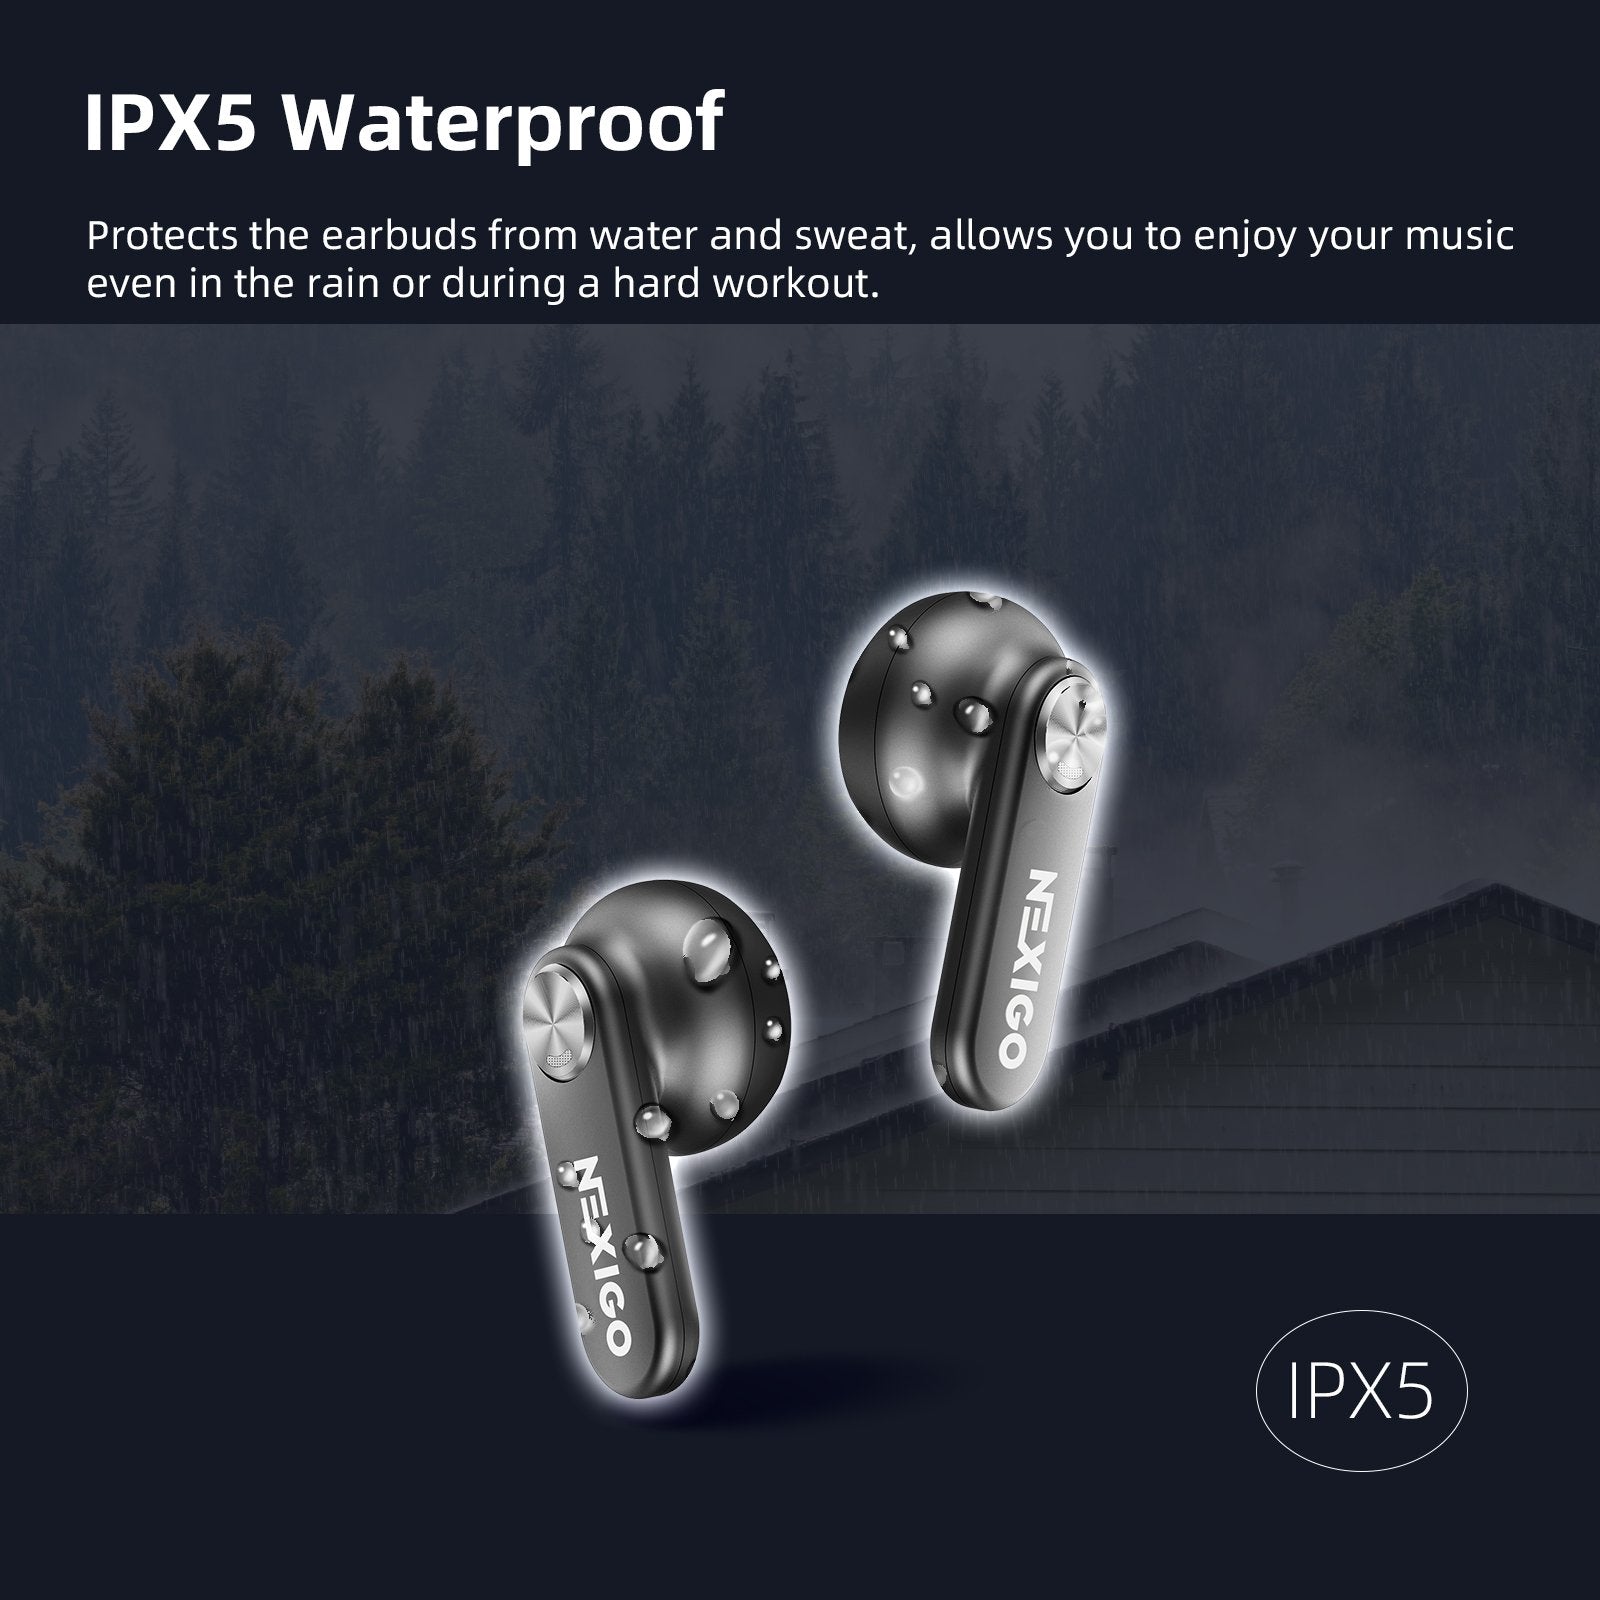 IPX5 water resistance rating protects the earbuds from water and sweat damage. 